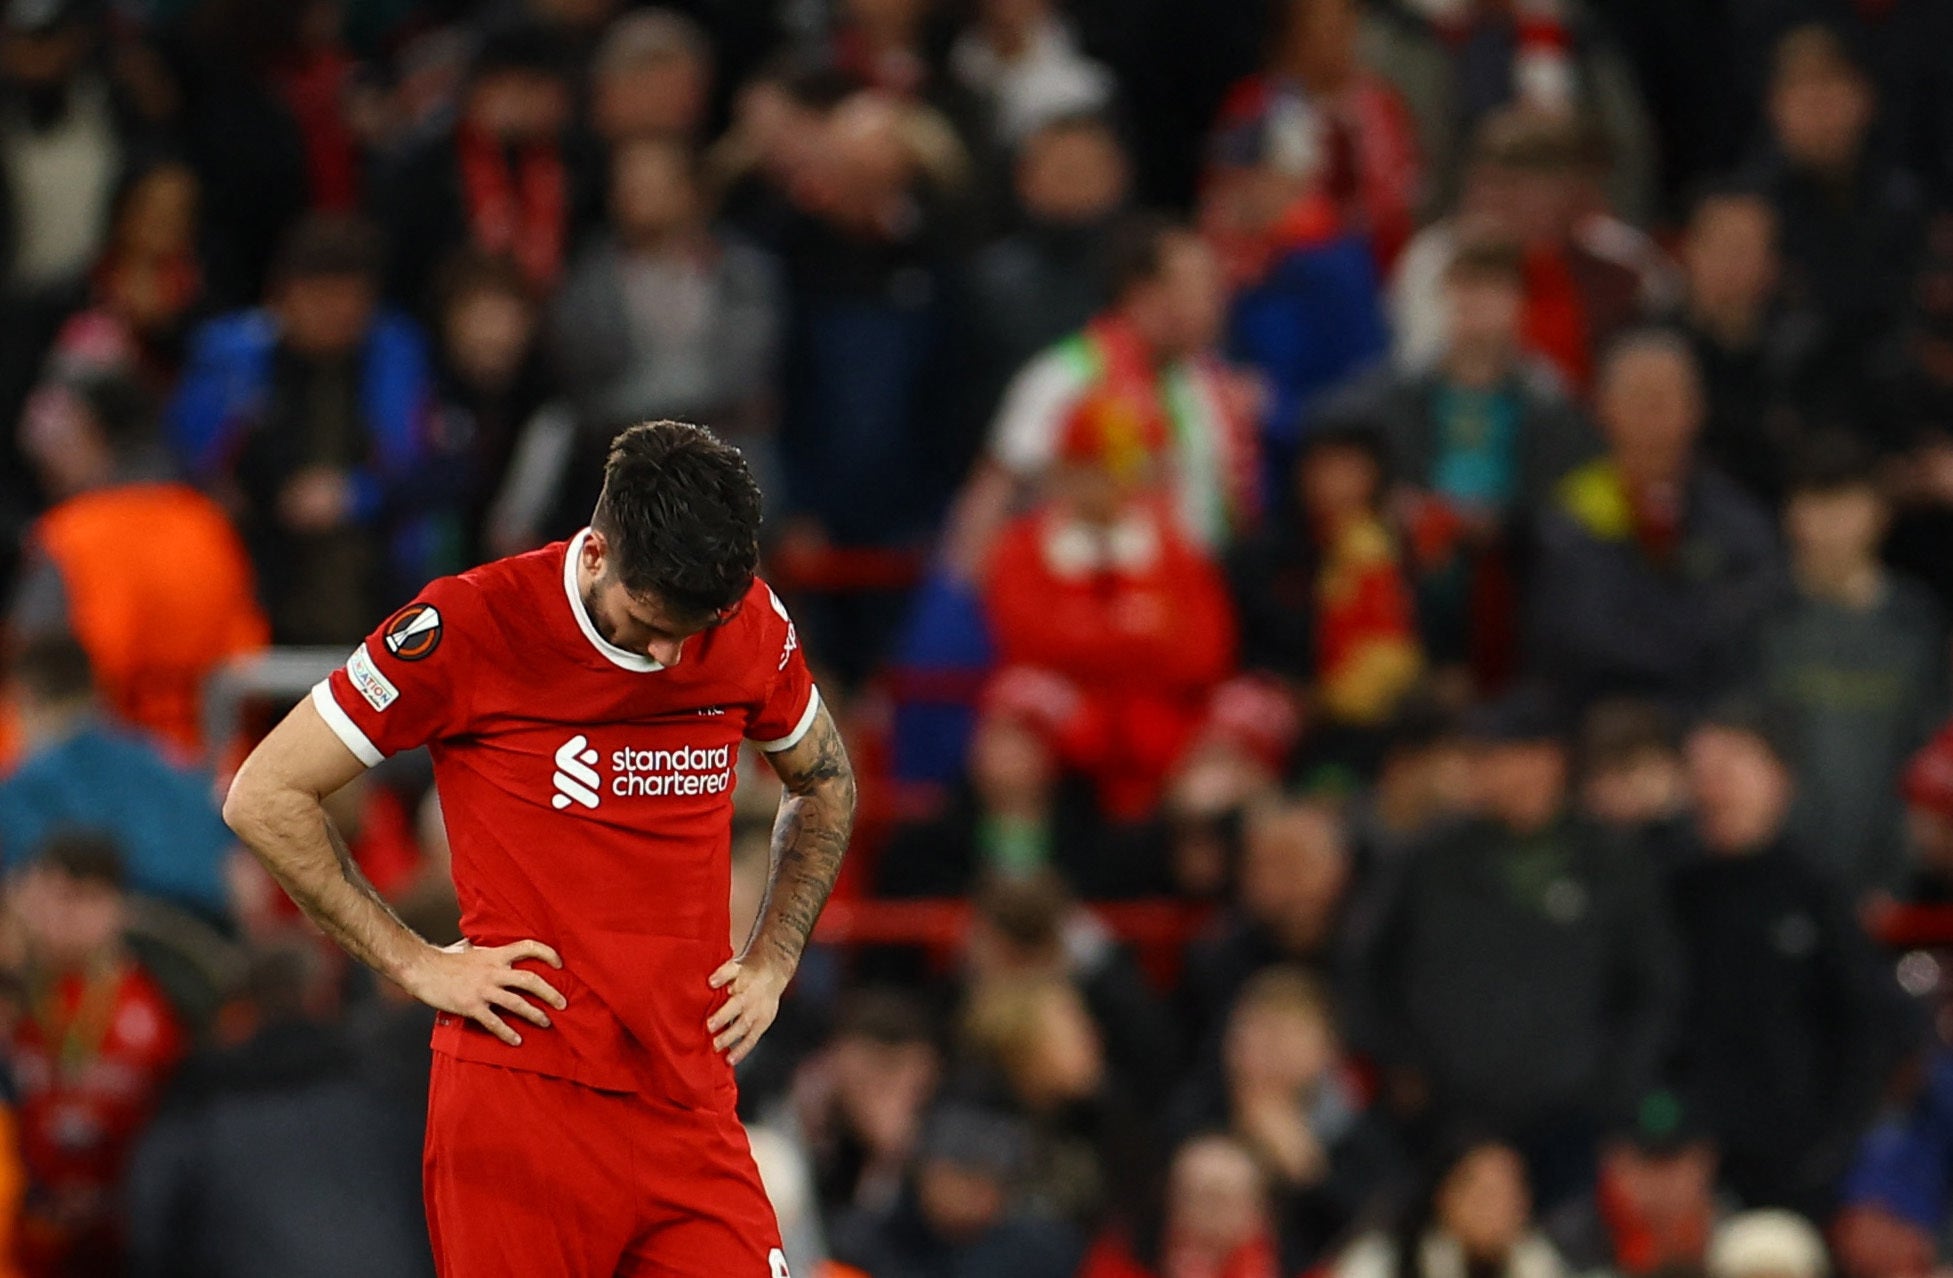 Liverpool slumped to their first defeat at Anfield since Real Madrid last year